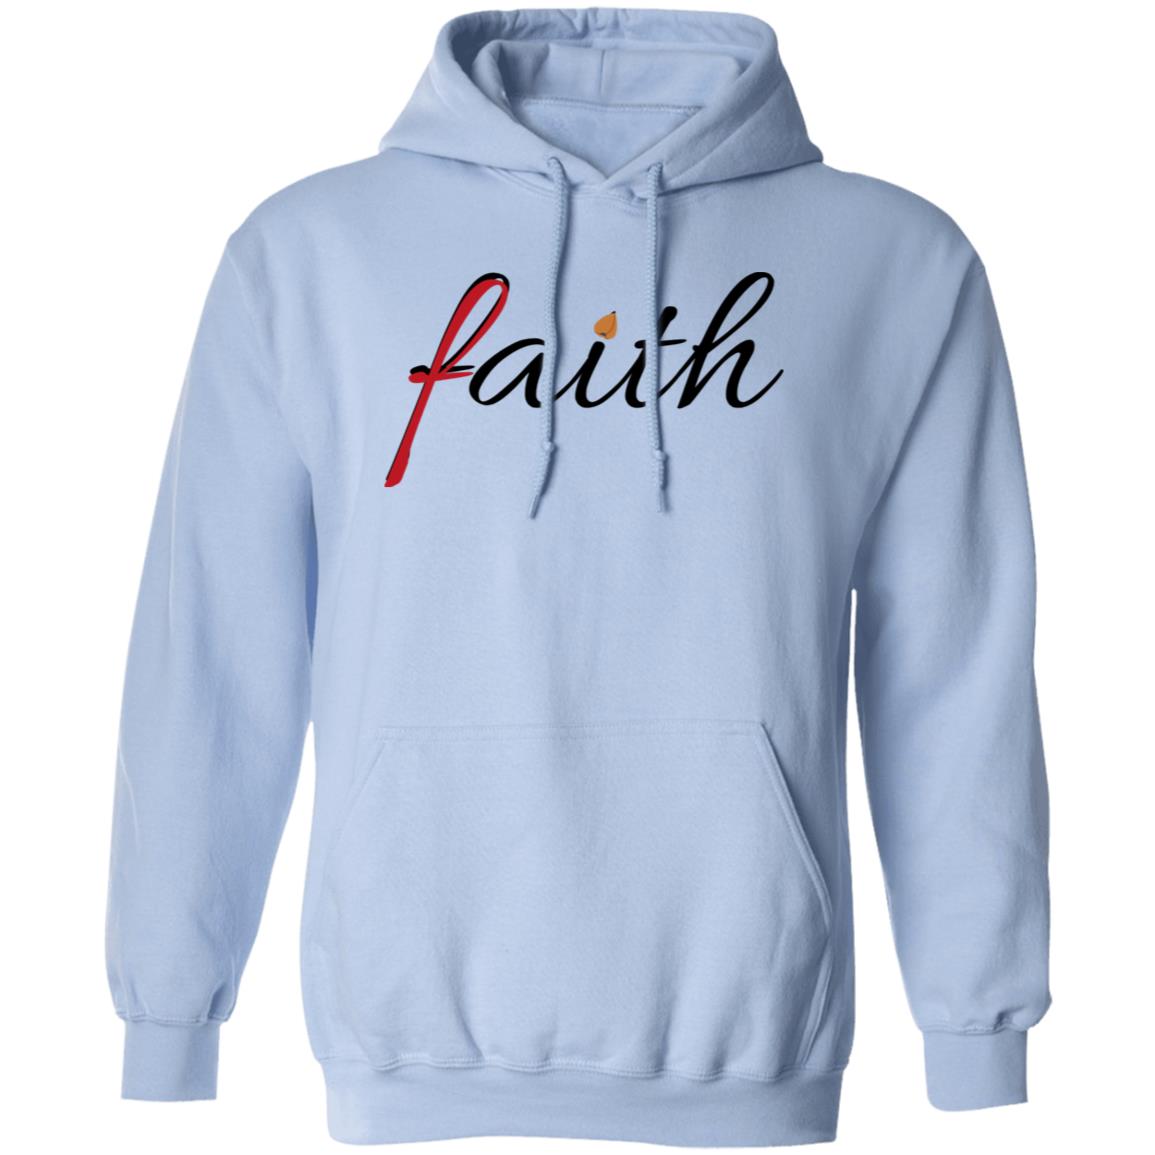 Mustard Seed of Faith Pullover Hoodie